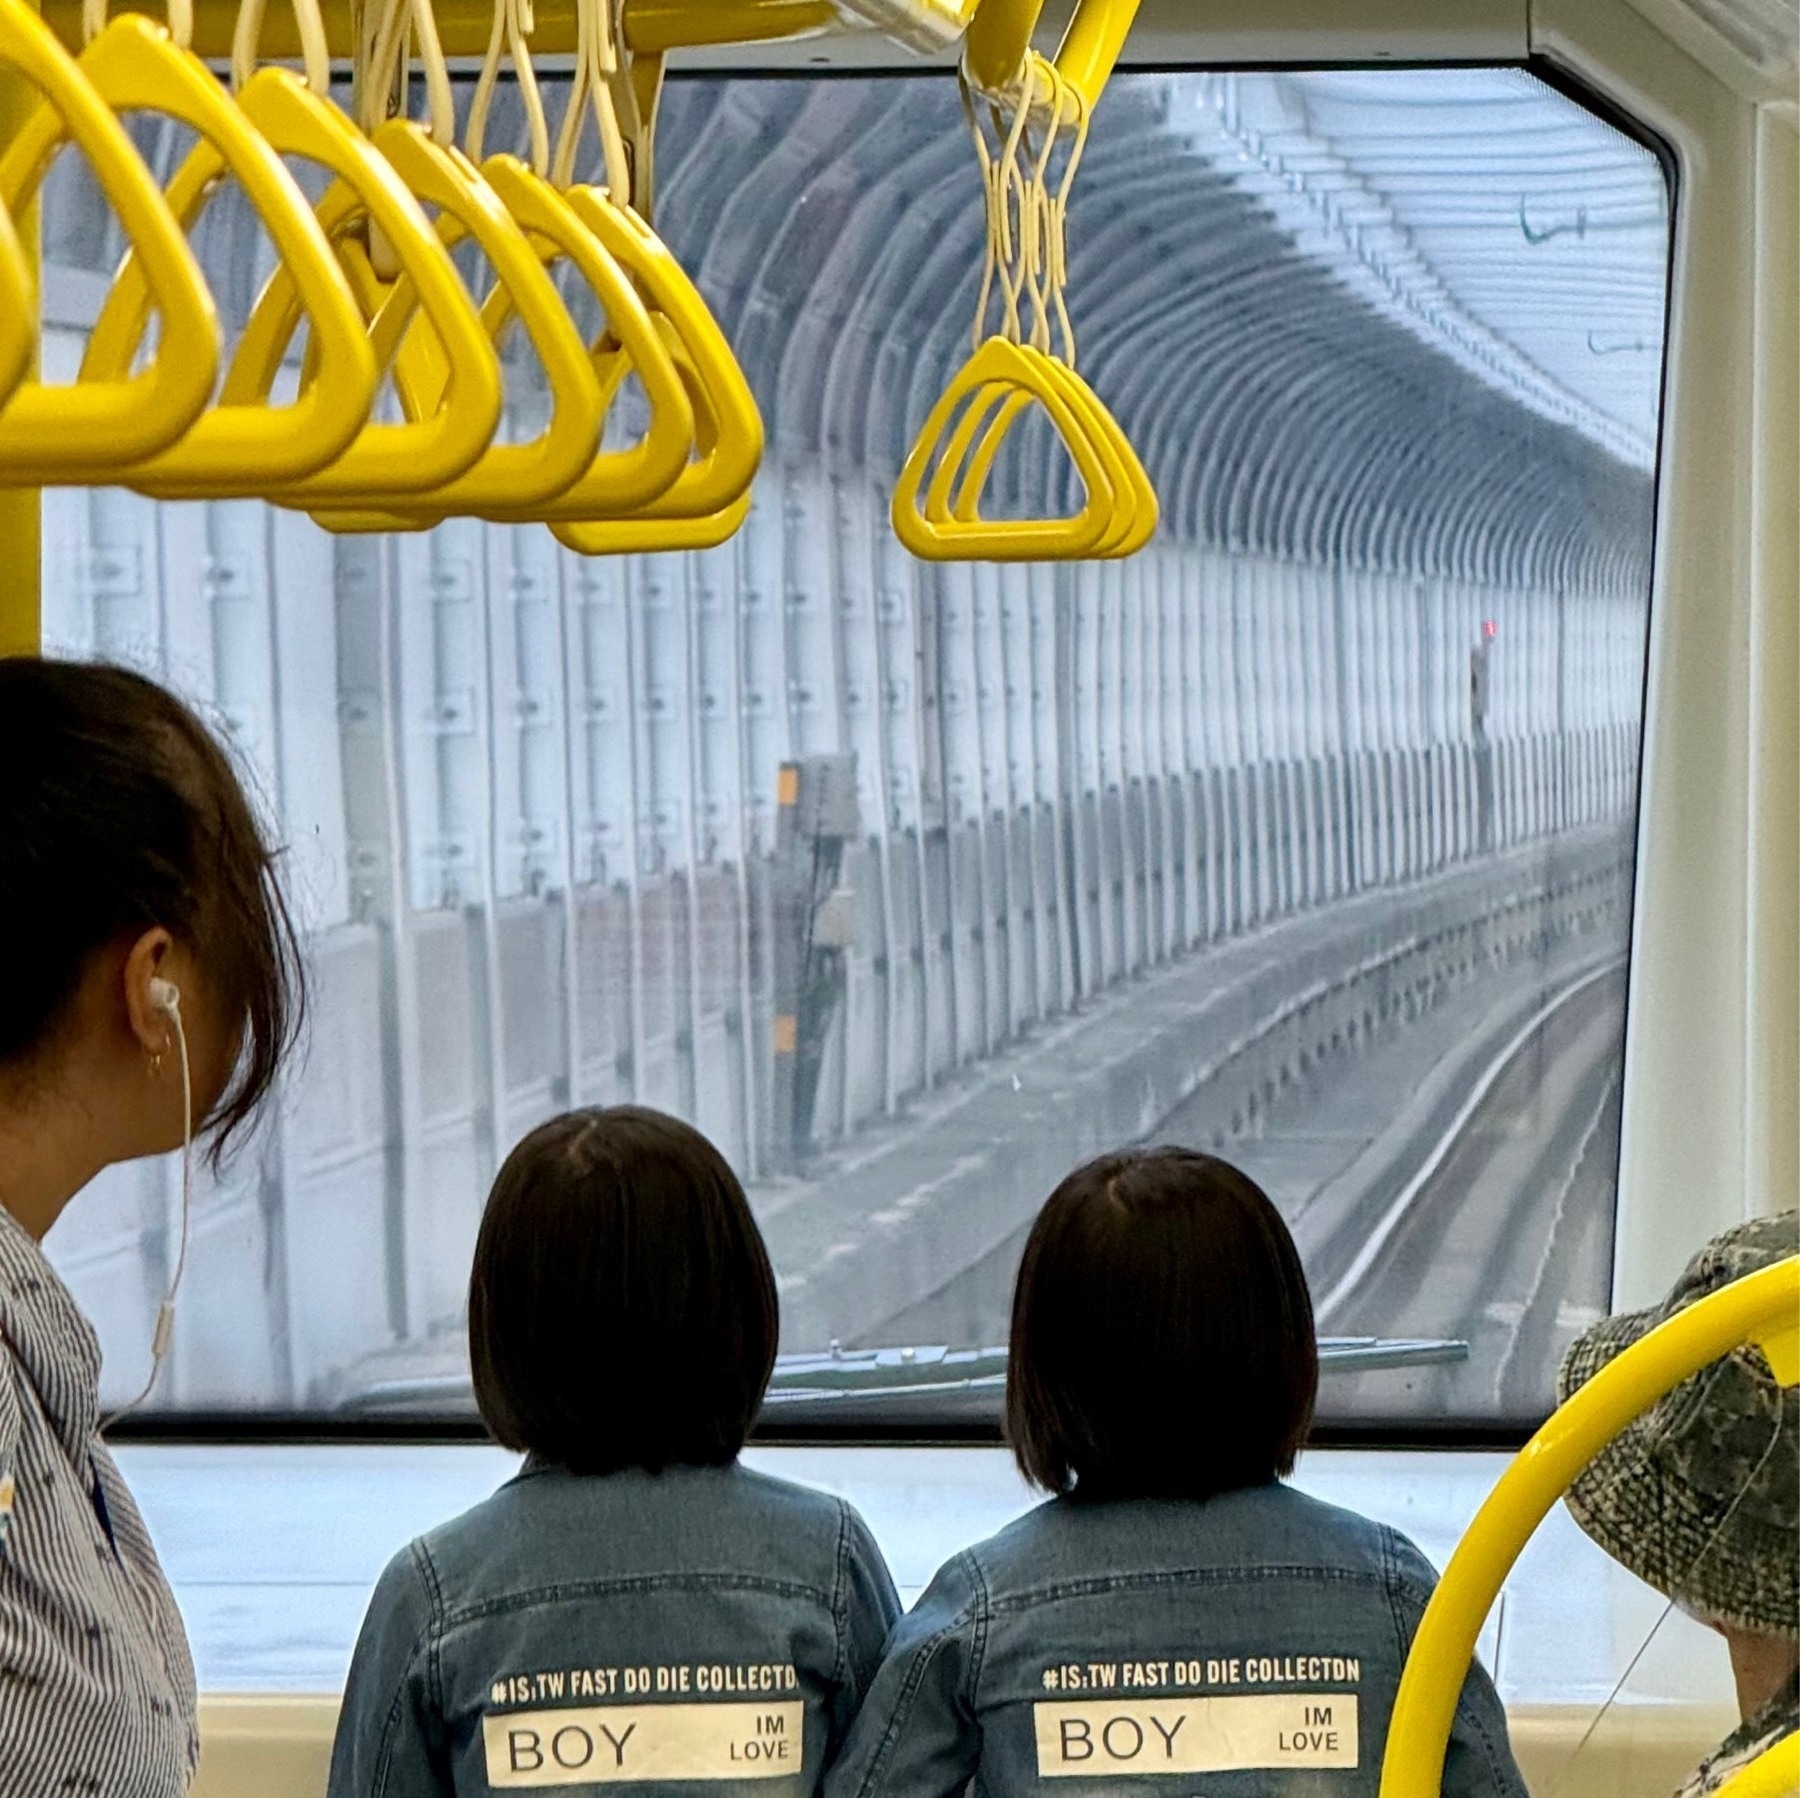 The heads of twin girls with bob haircuts looking out of the front of the (automated) metro train down the tracks, other passengers either side, and many yellow grab handles overhead